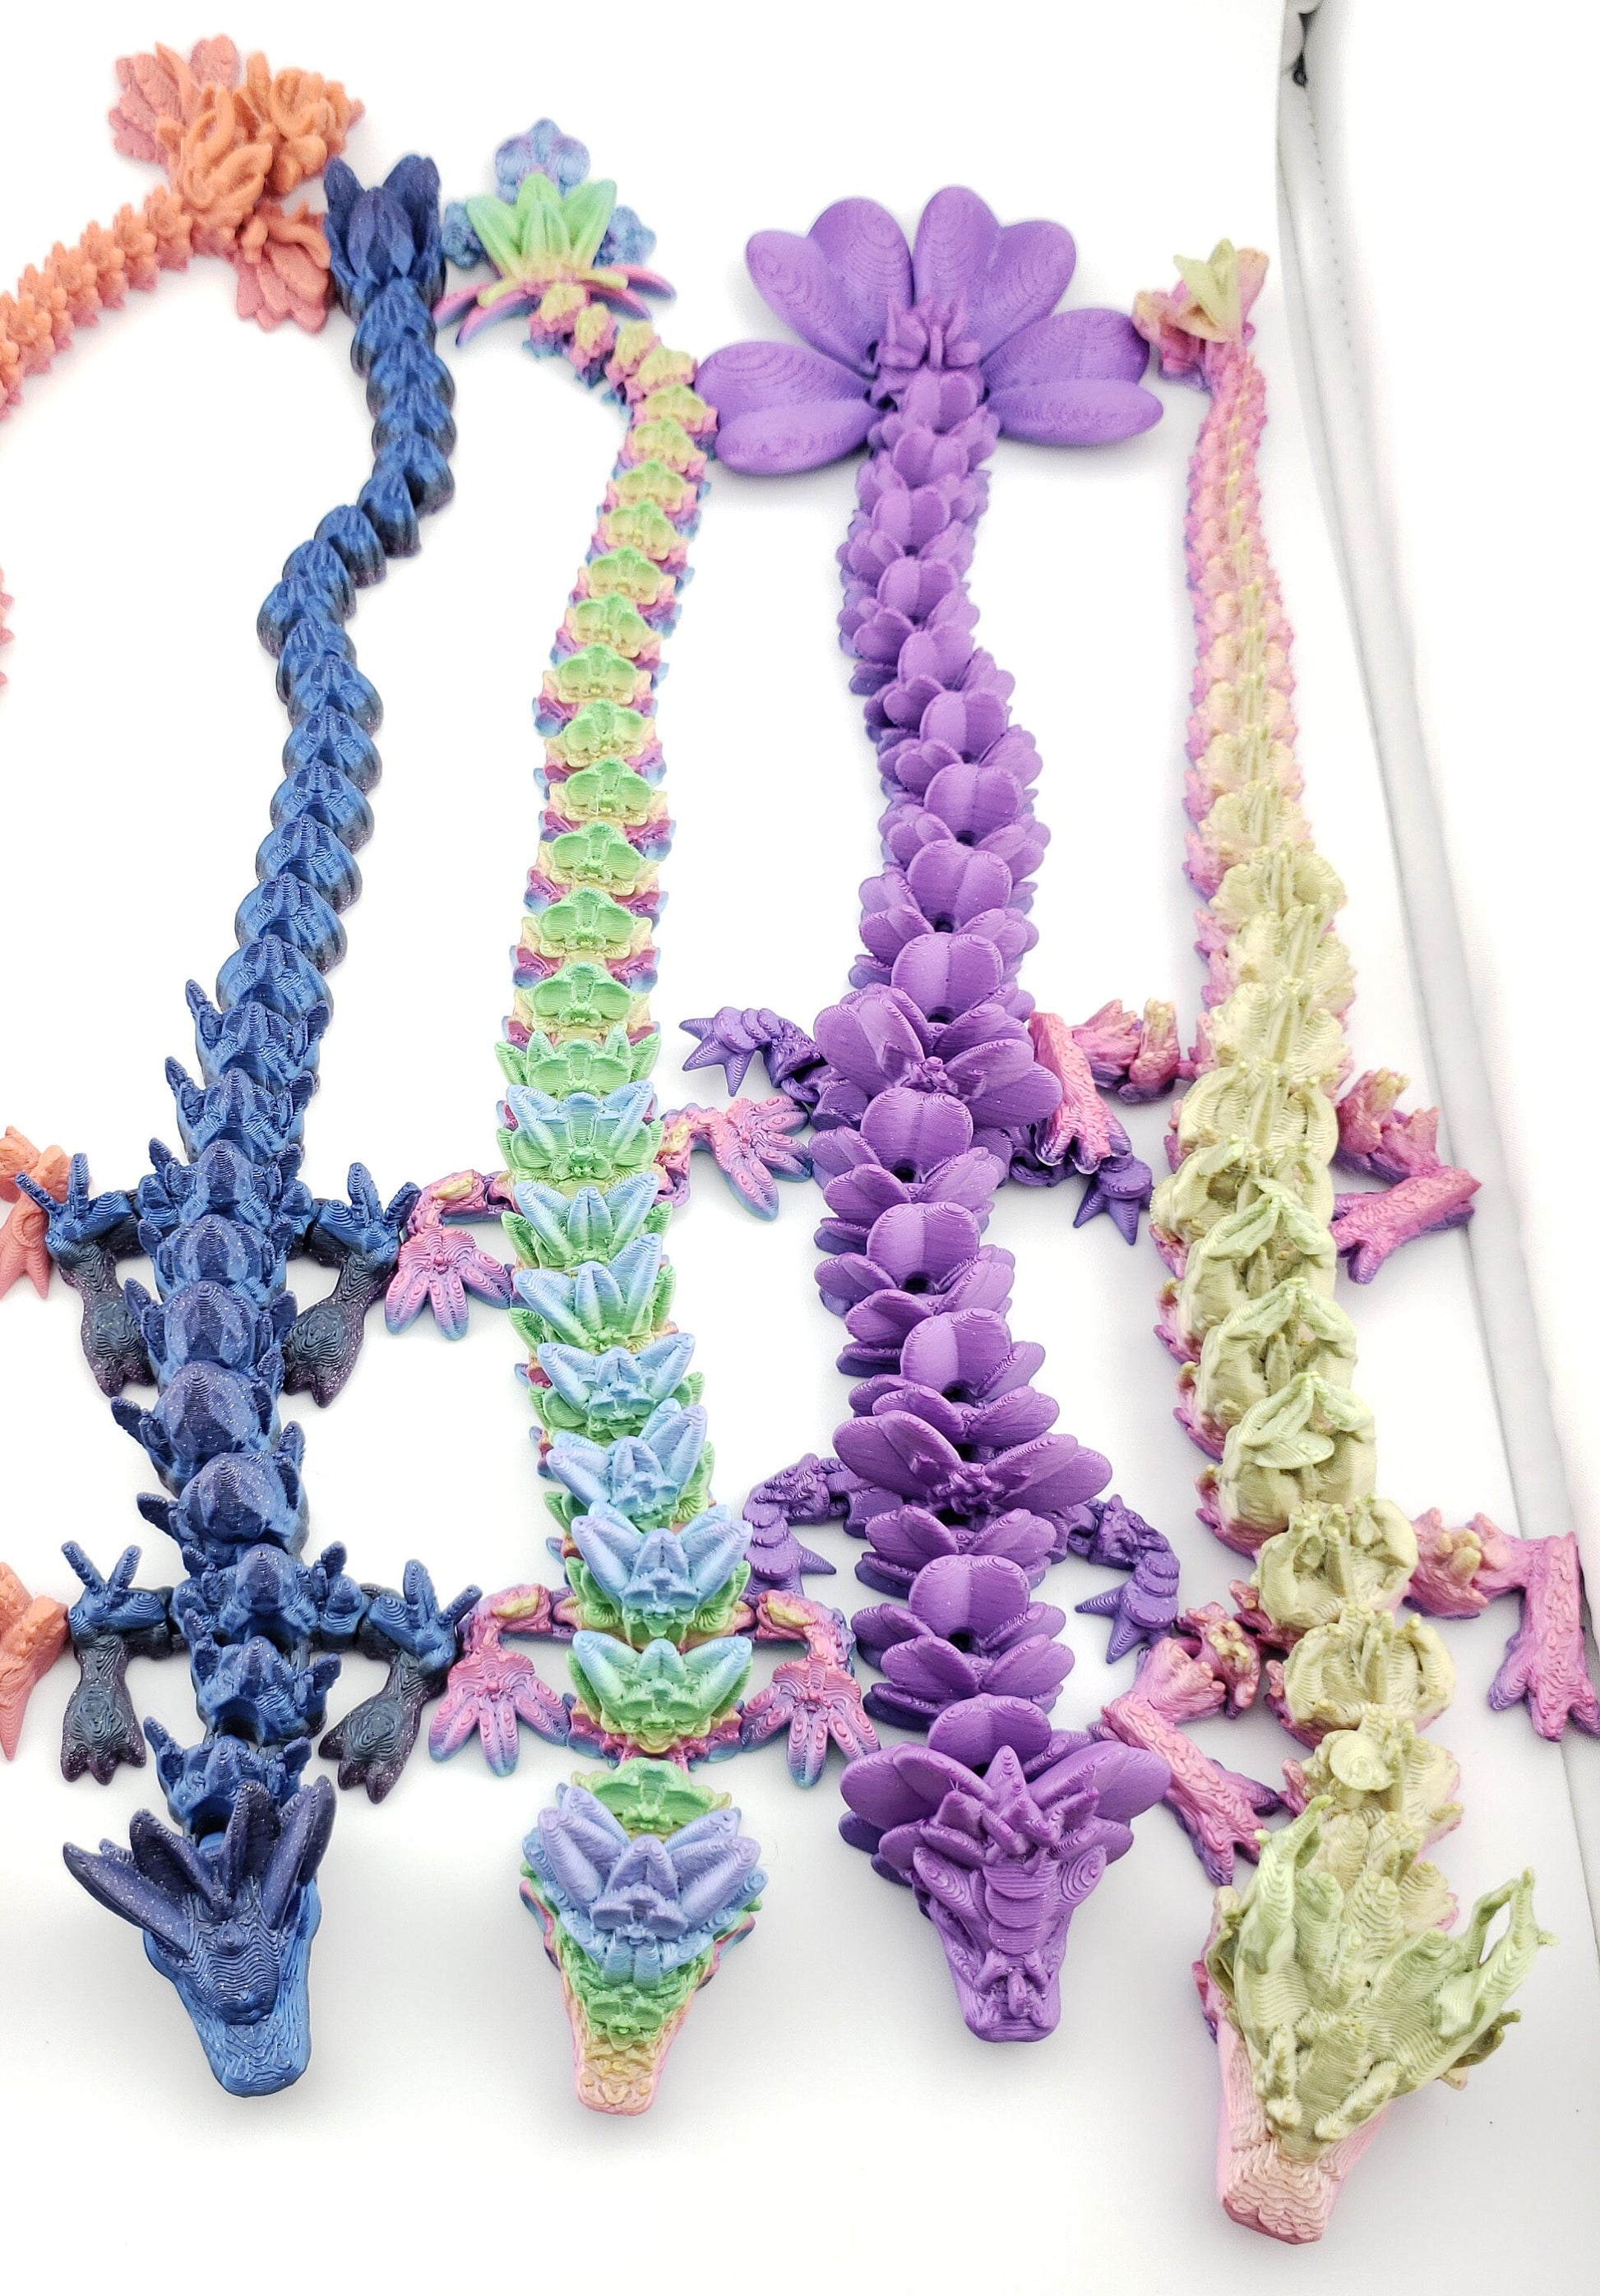 12 Inch 3D Printed Dragons - Sensory Stress Fidget - Articulated - Cinderwing3d